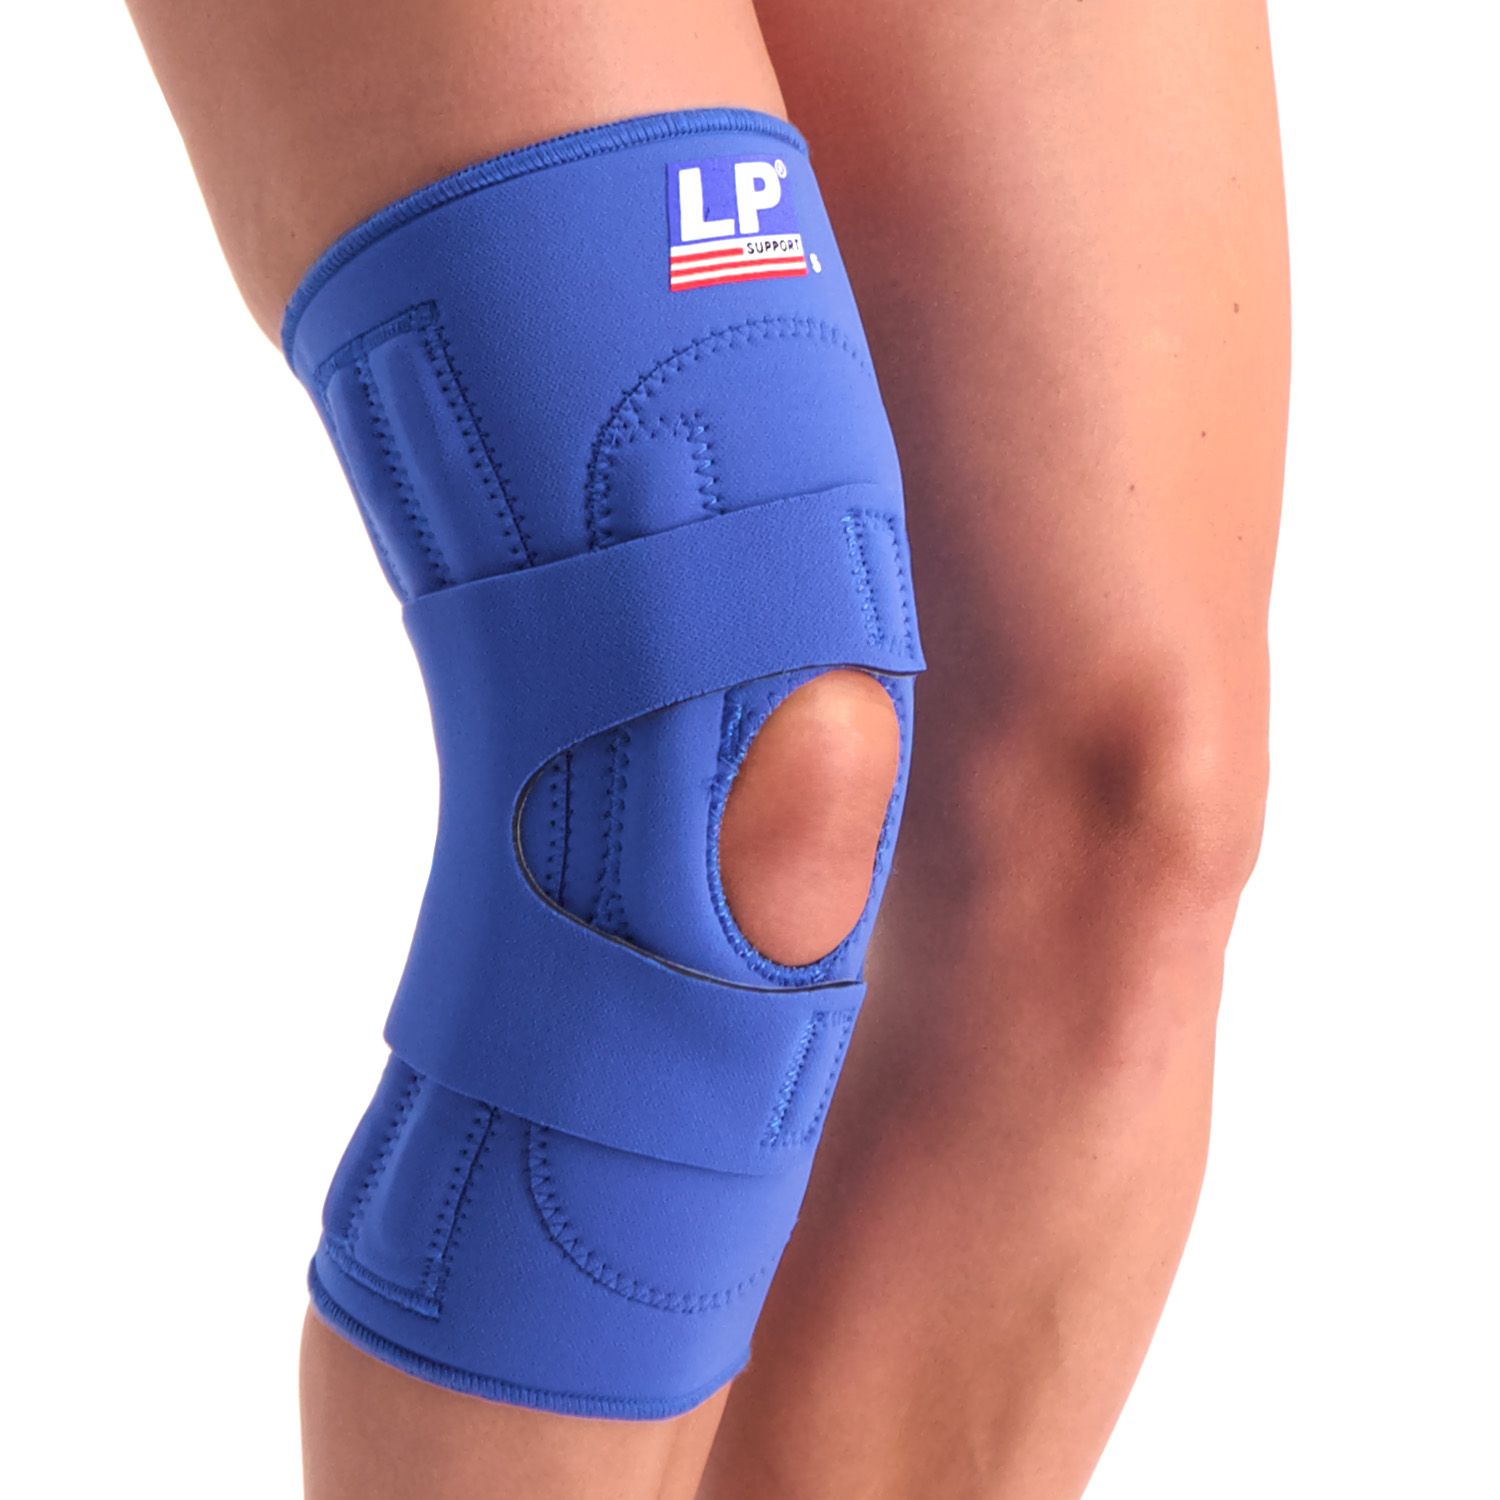 LP Support 721 Knee support